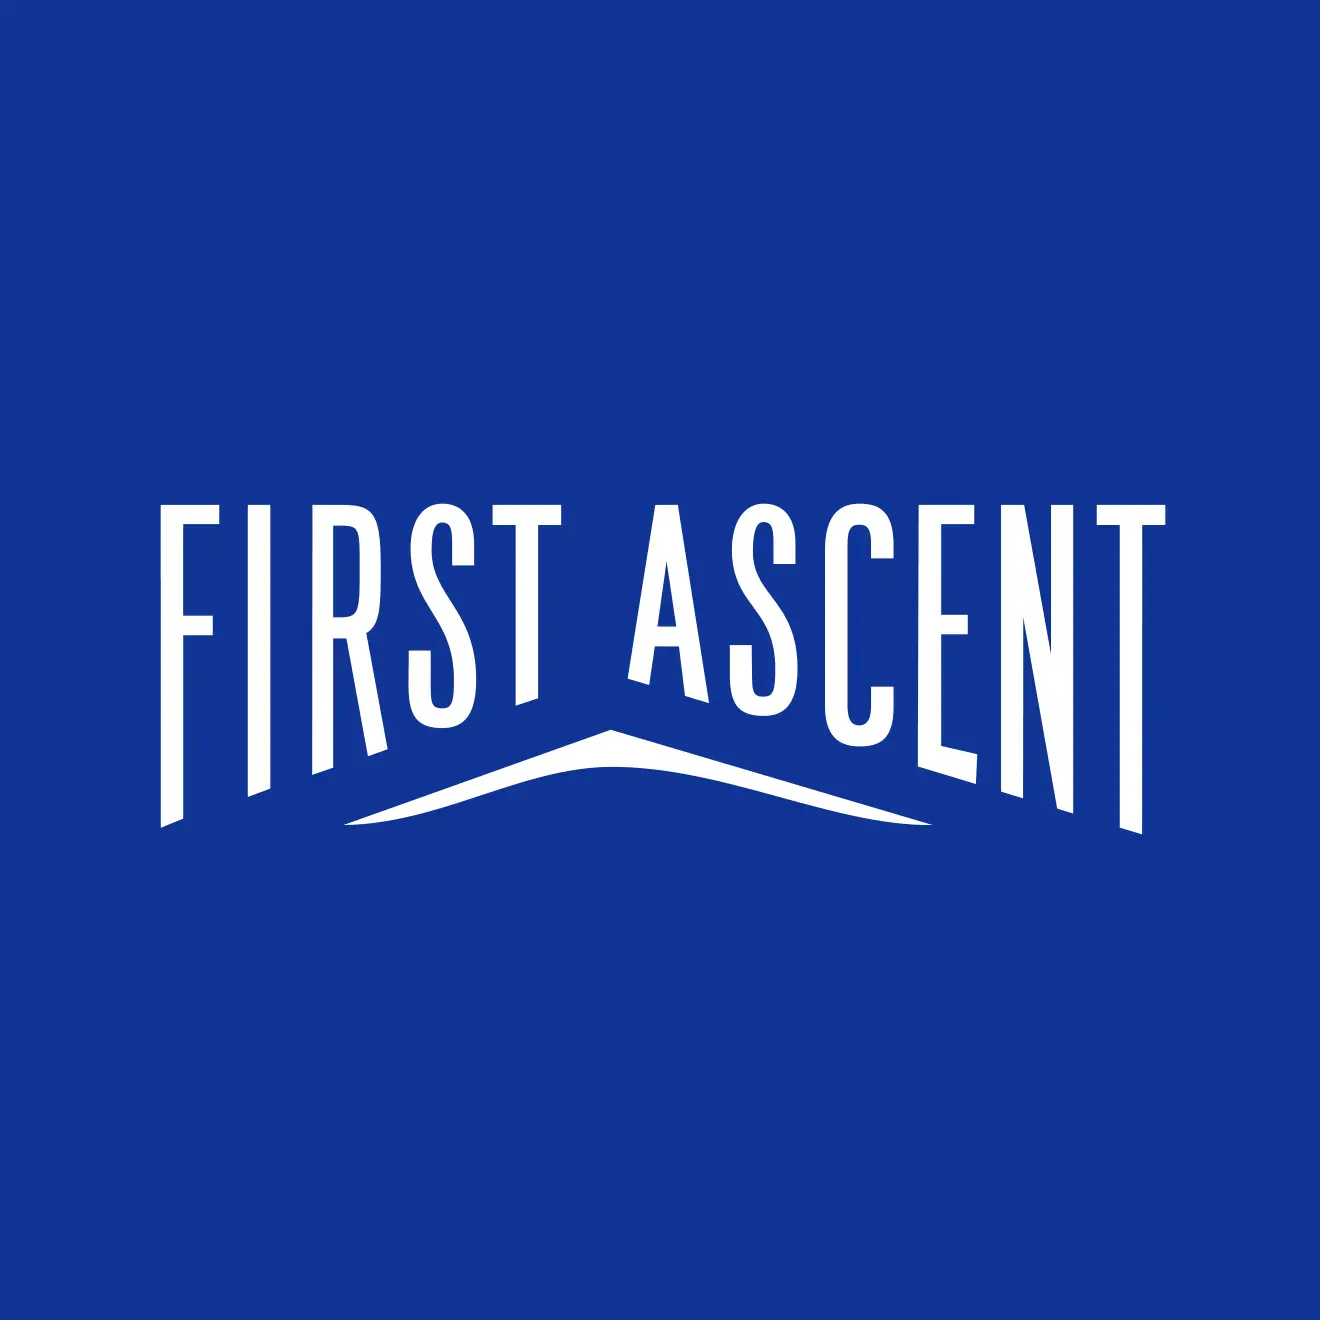 Business logo of First Ascent